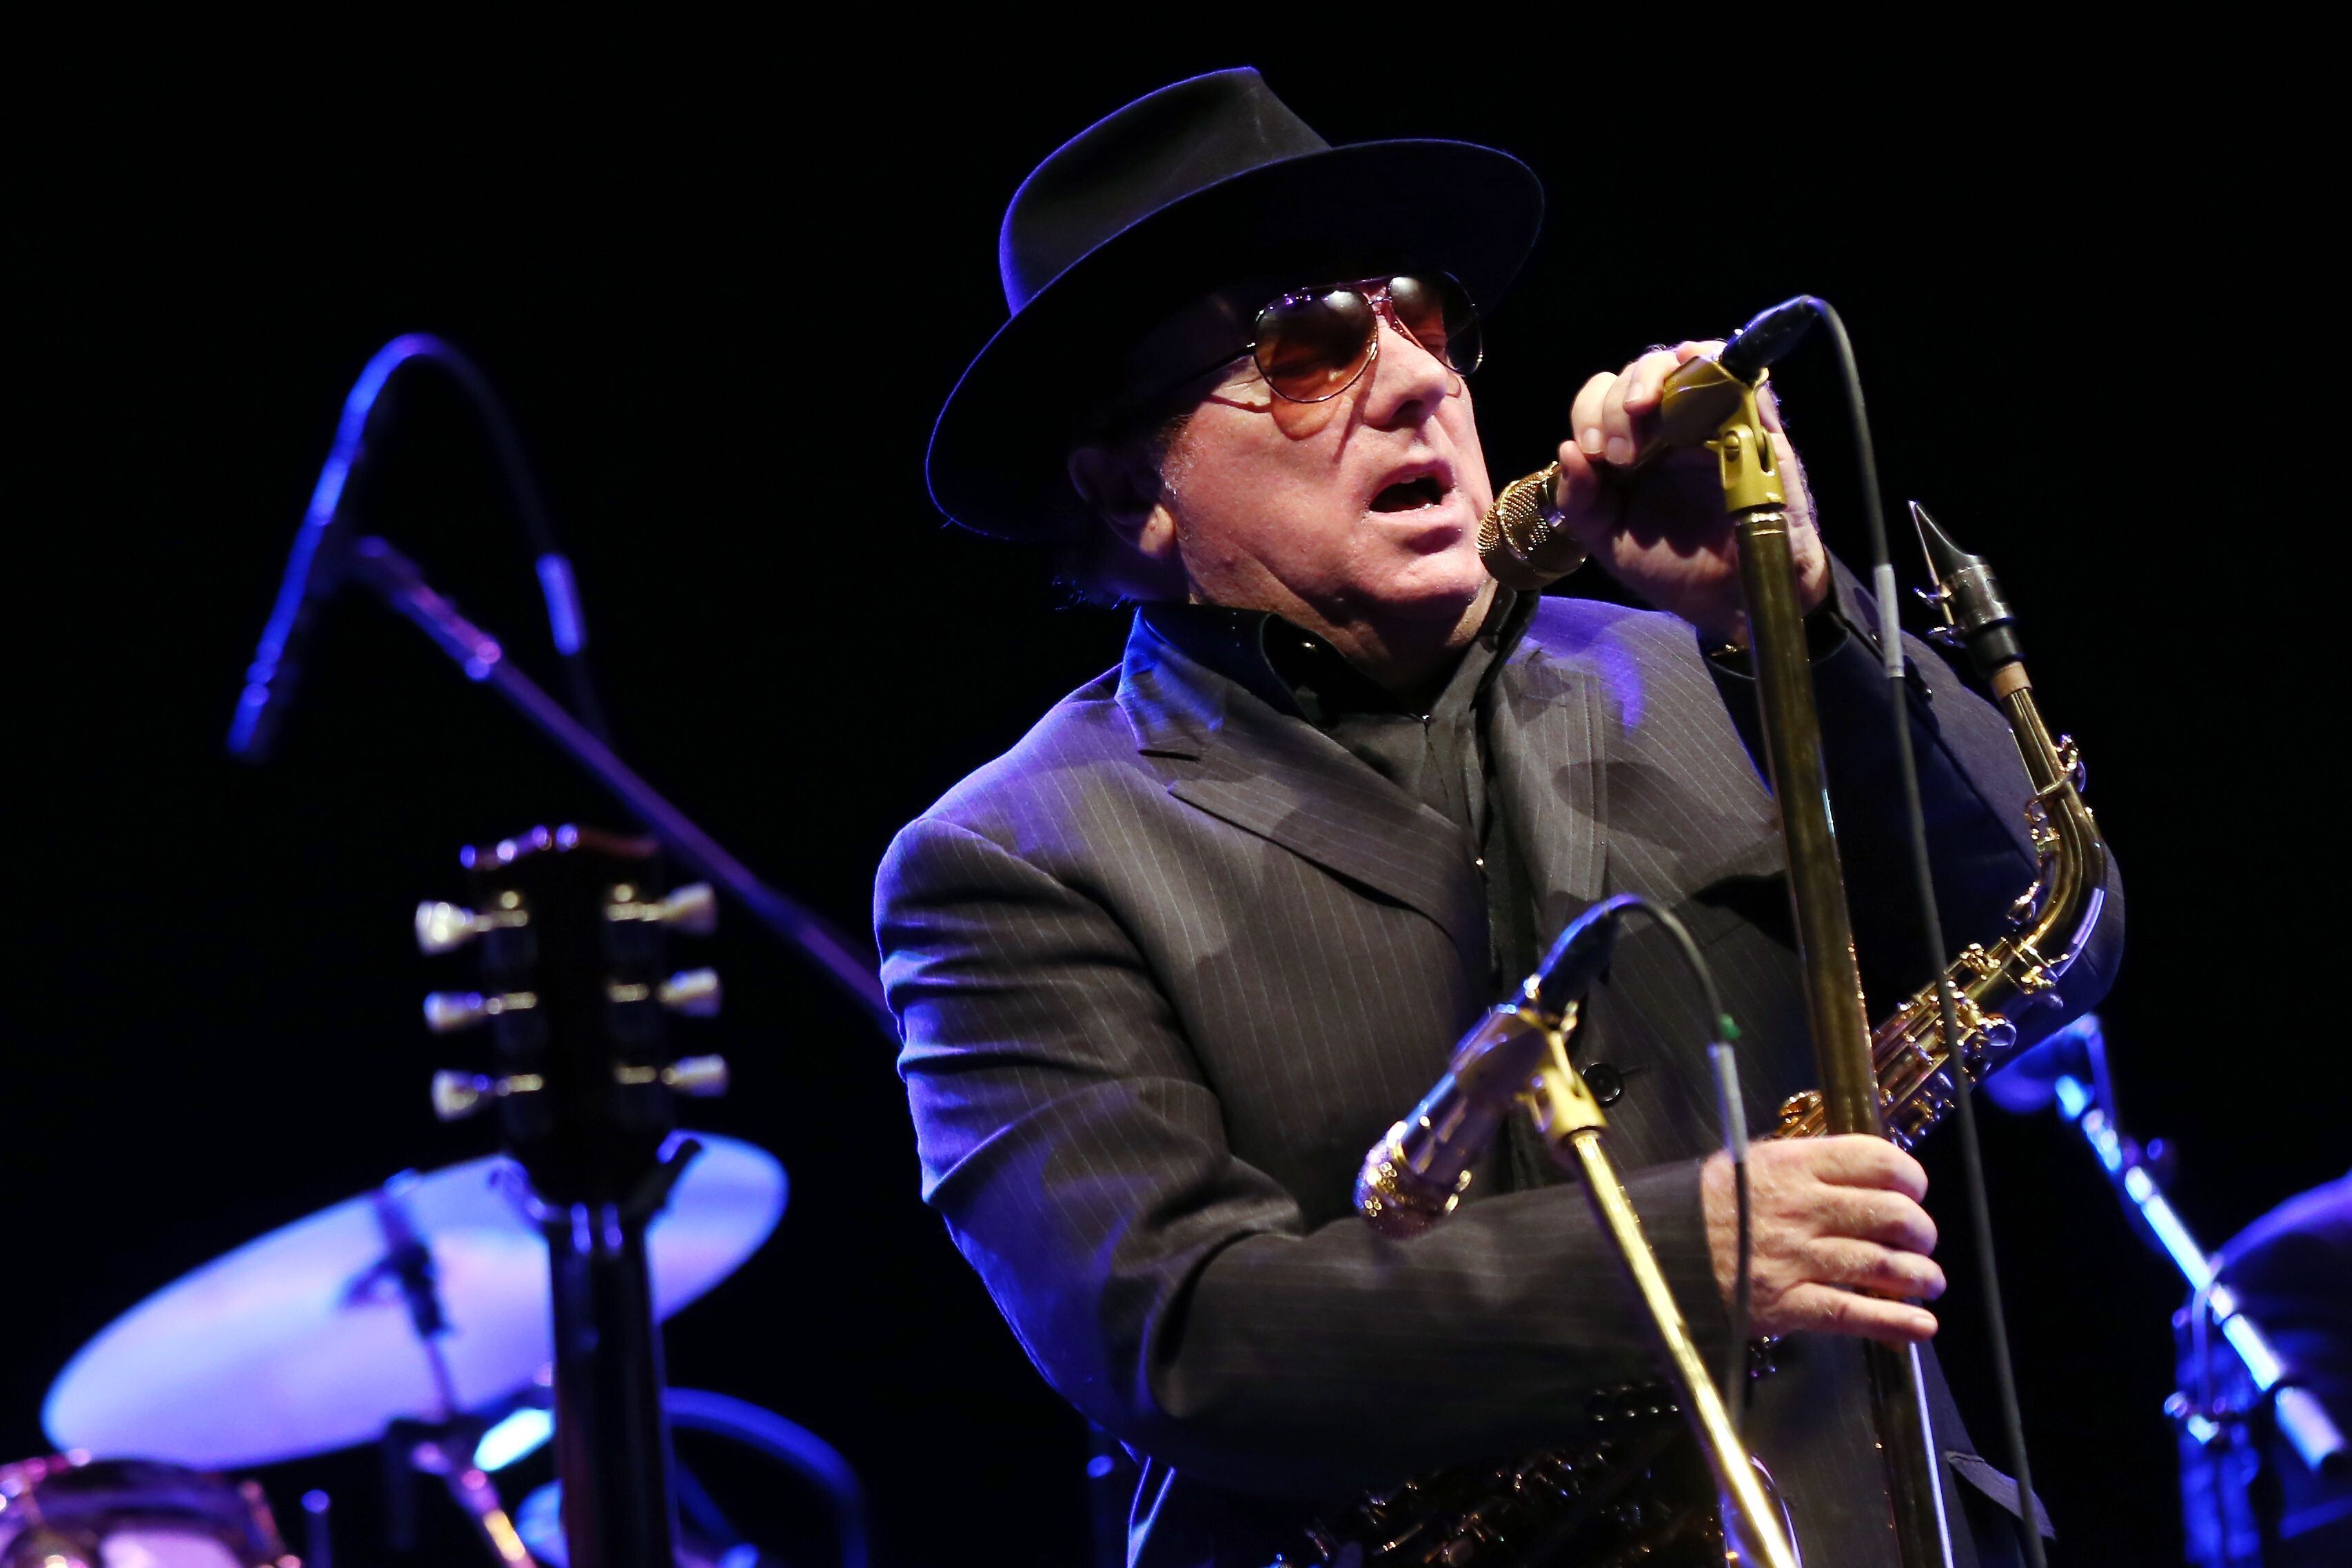 Northern Ireland's Health Minister Is Suing Van Morrison Over Covid  Criticism - The New York Times